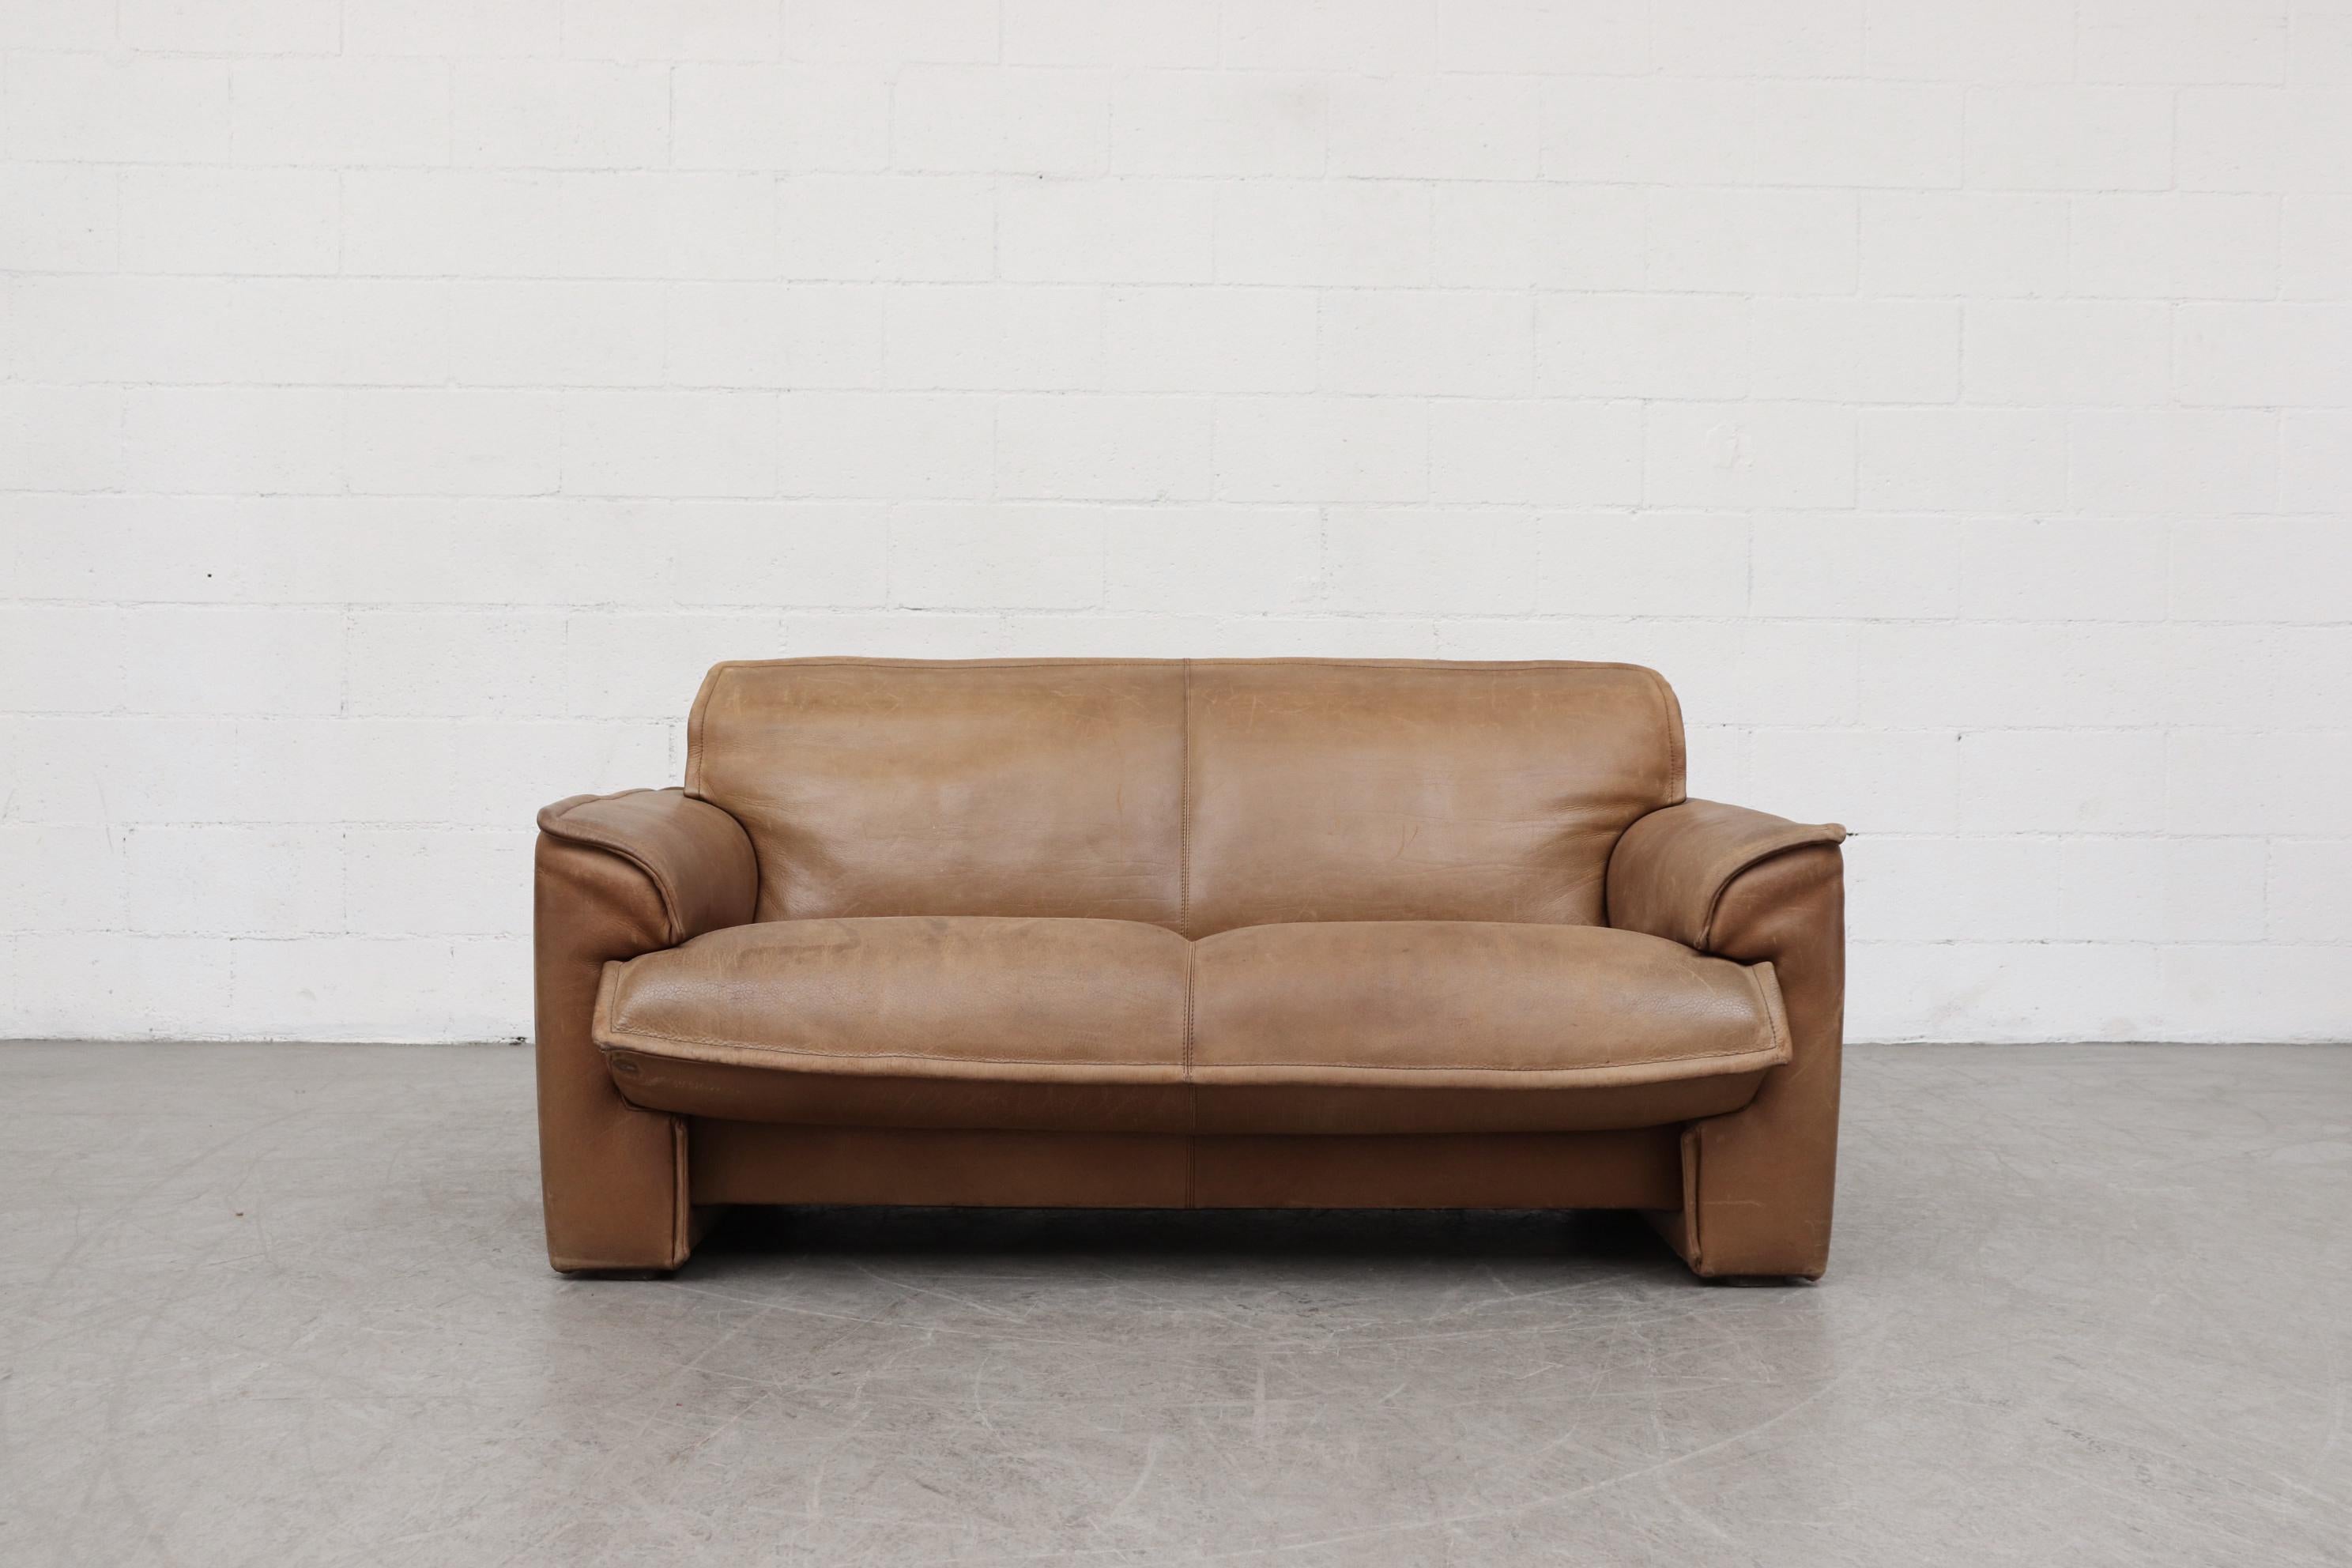 Leolux Buffalo leather love seat sofa in very original condition with heavy patina and visible signs of wear. Other similar sofas available in this color tone a with heavier patina and others in darker leather, listed separately. Actual color may